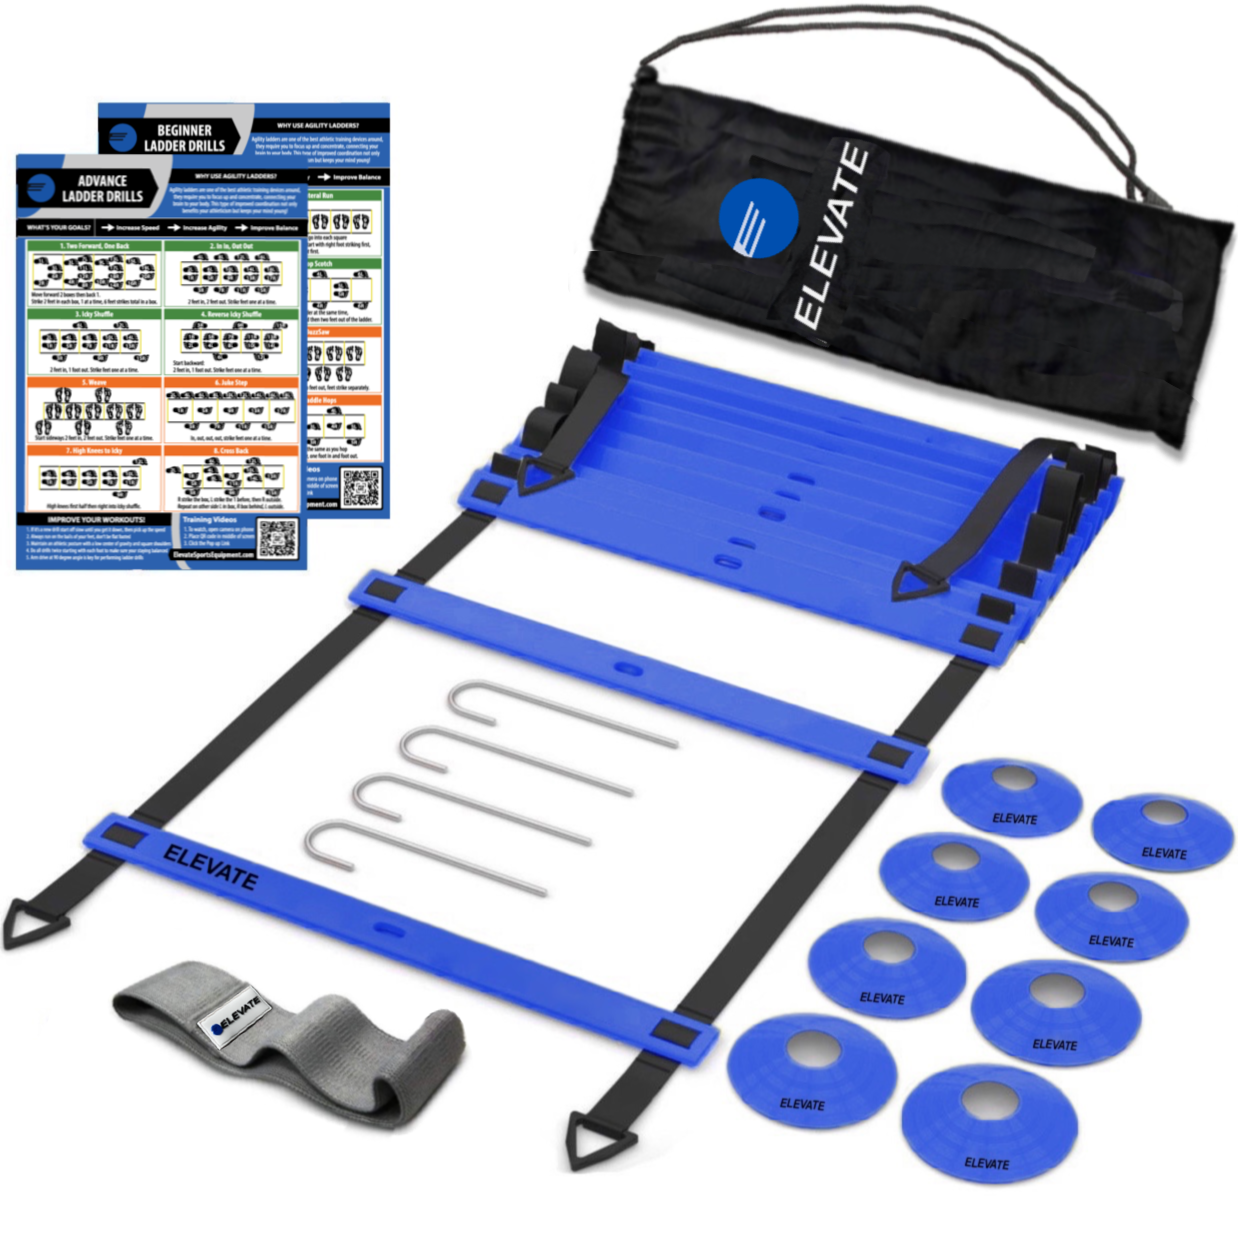 Agility Ladder + Agility Cones + Fabric Resistance Band Training Set to improve athleticism